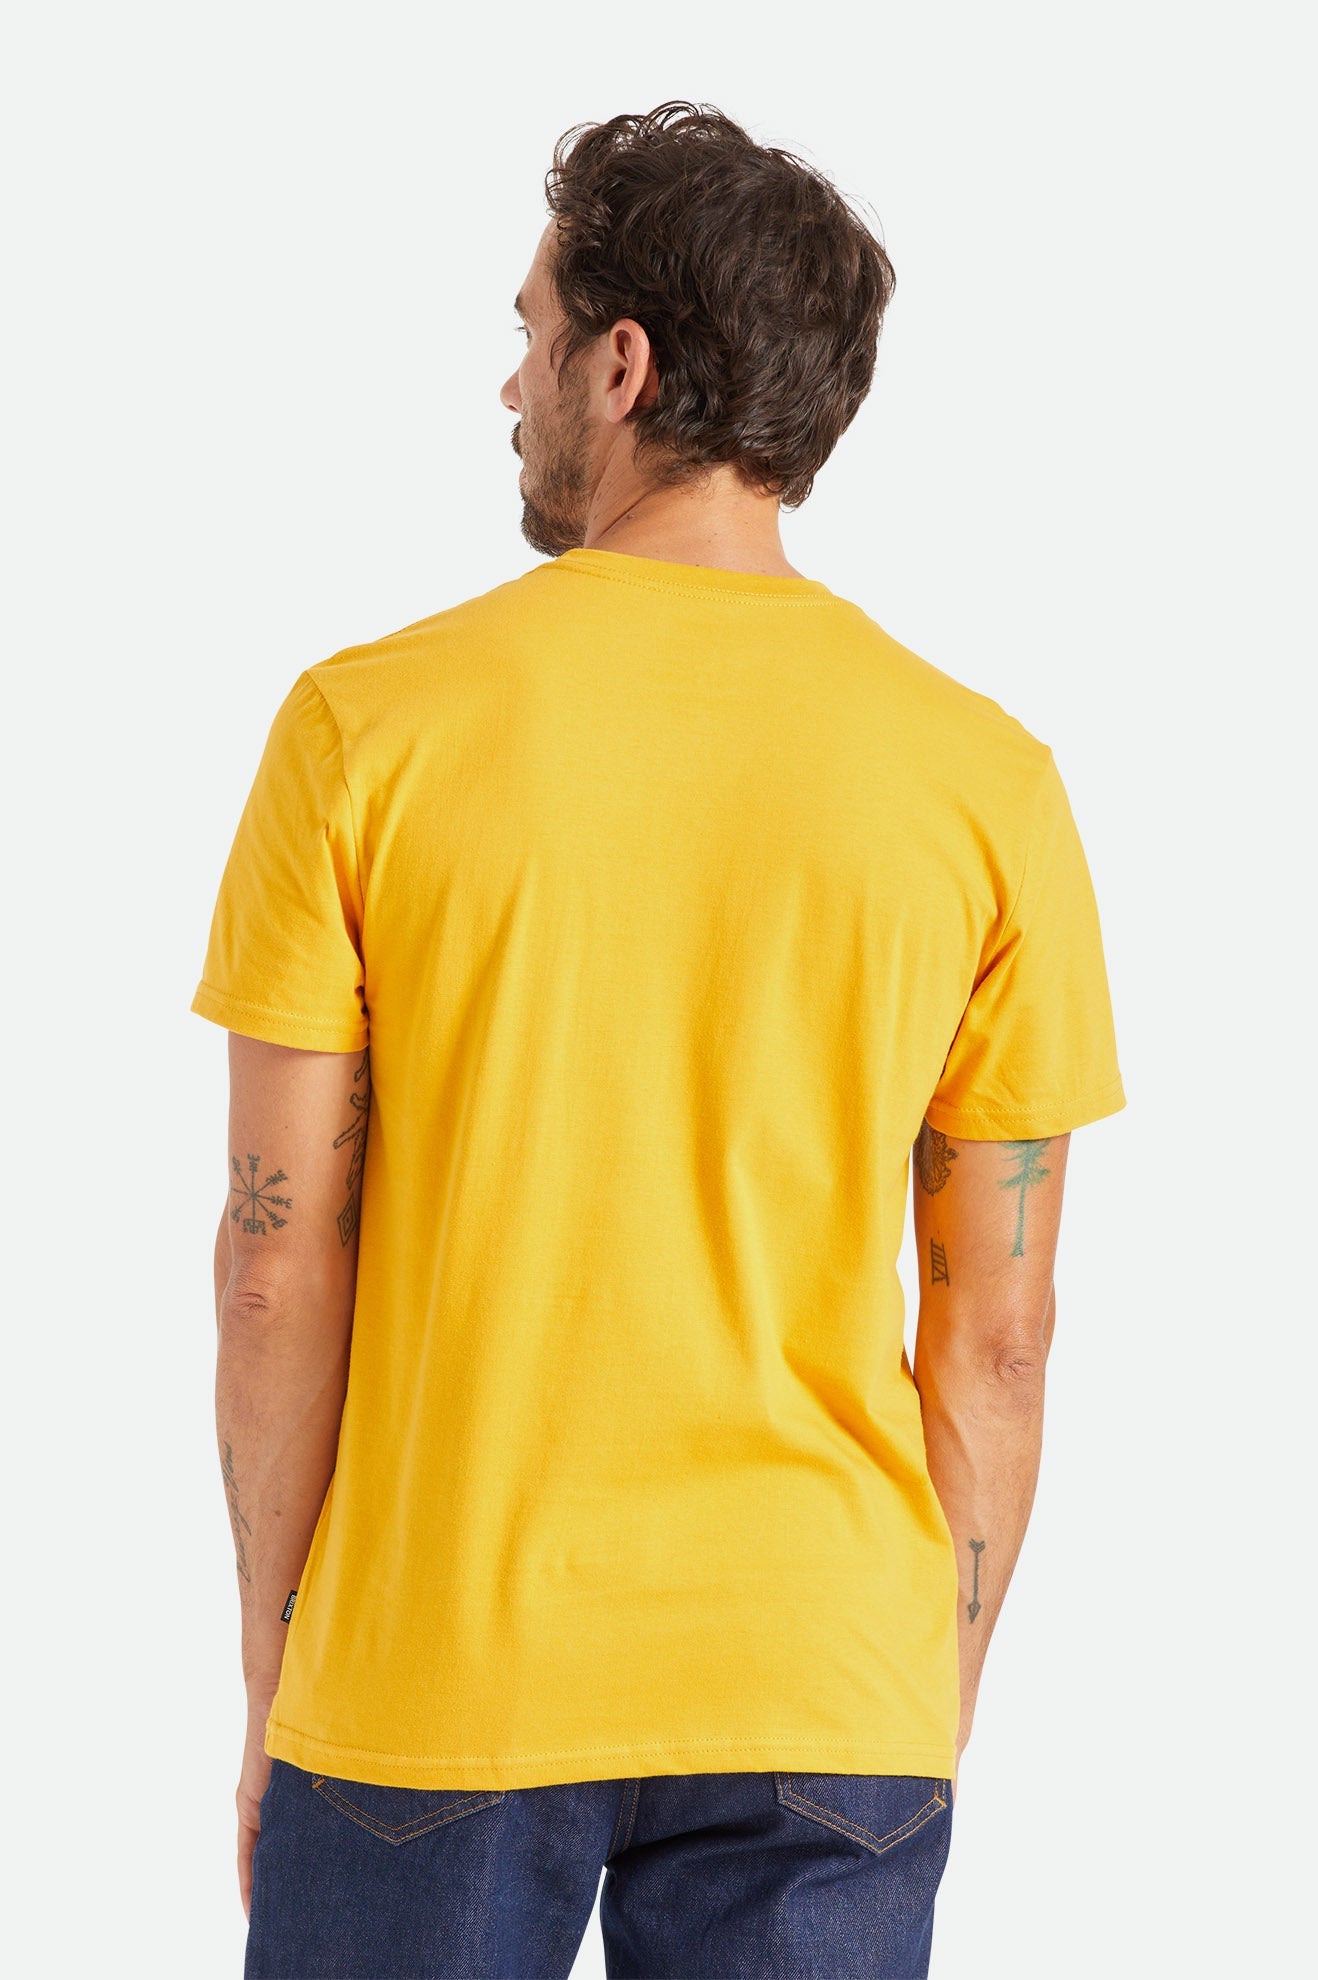 Willie Nelson Again Road S/S Tee - Texas Yellow